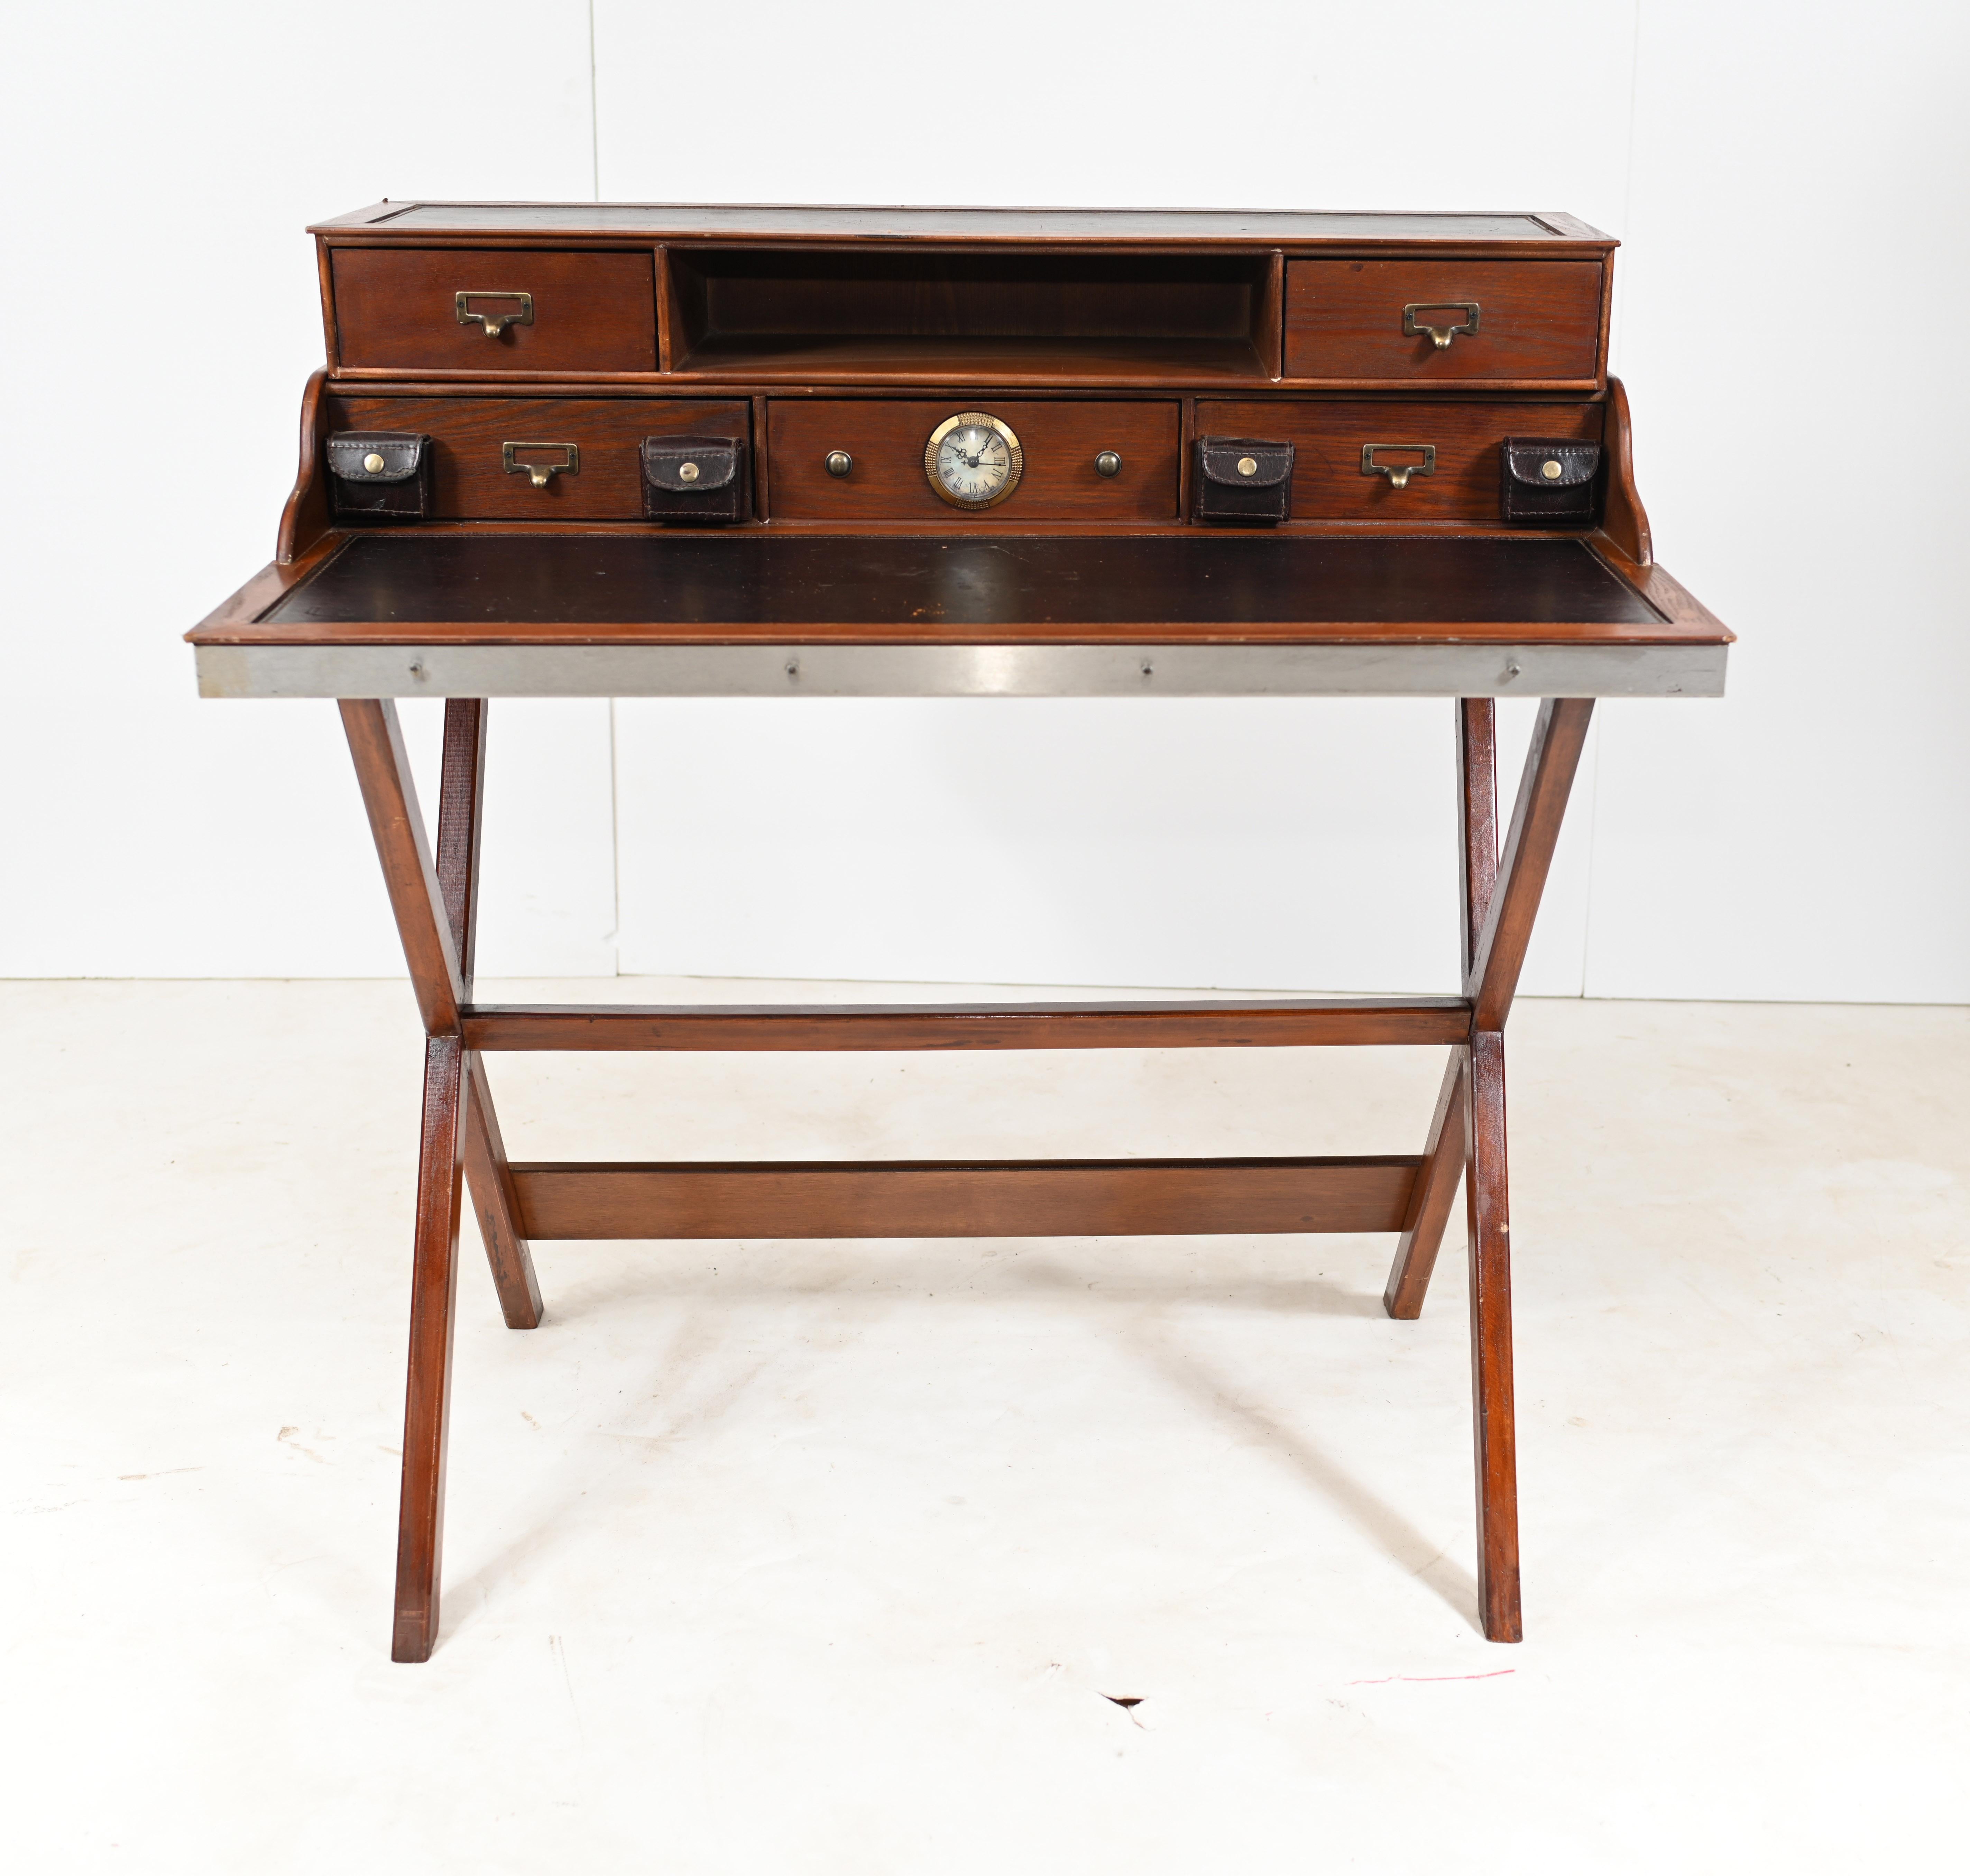 Gorgeous Victorian Davenport desk we date to circa 1880
Hand crafted in mahogany it features a pop up mechanism 
Top opens out to reveal writing surface and numerous cubby holes
Offered in great shape ready for home use right away
We ship to every